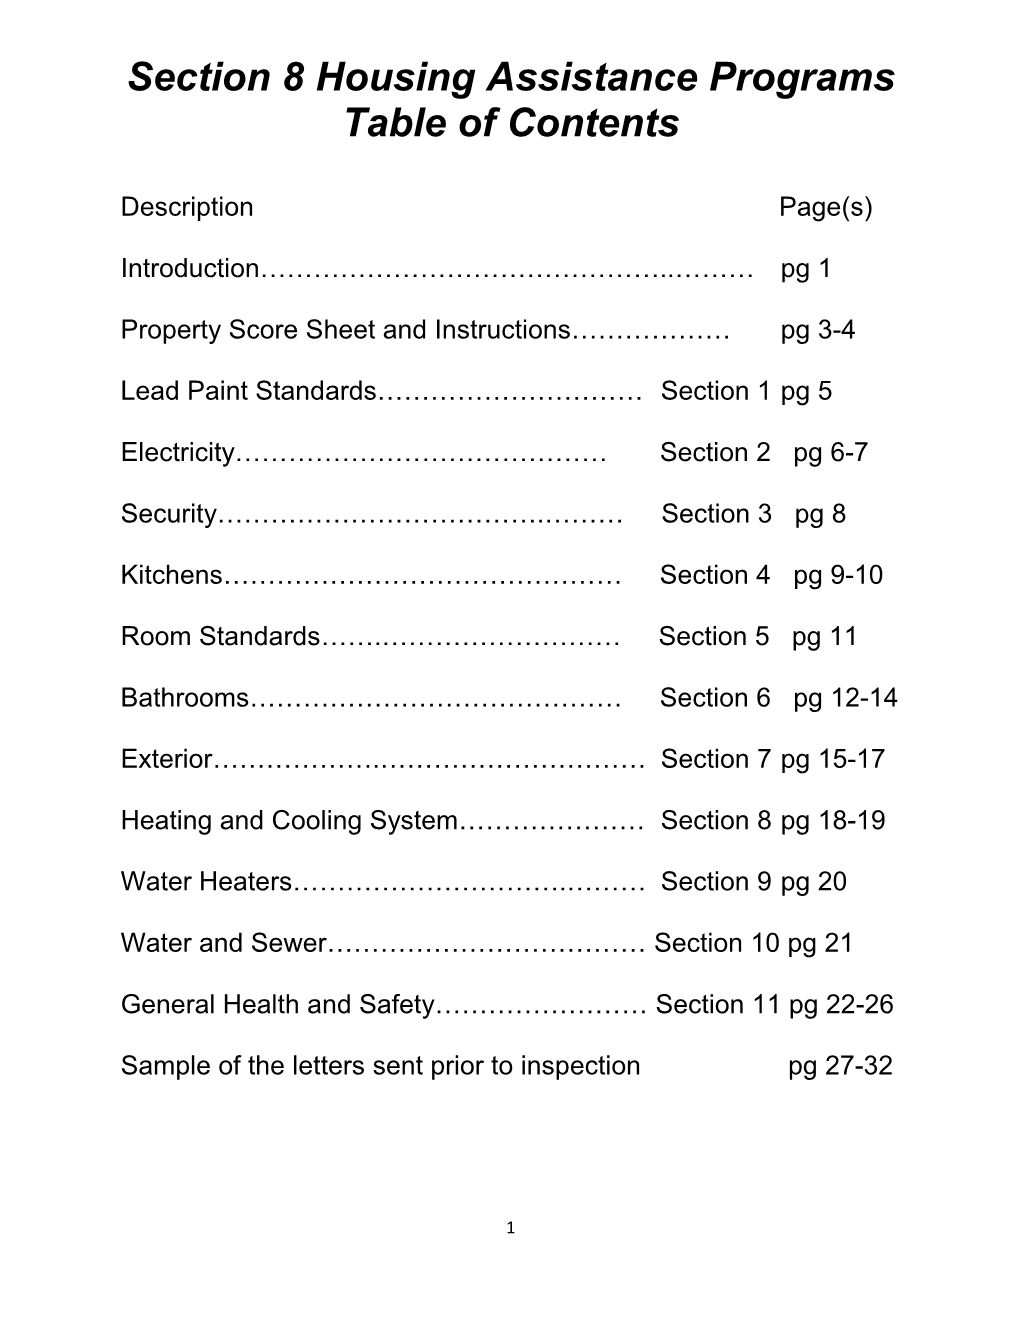 Section 8 Housing Assistance Programs Table of Contents